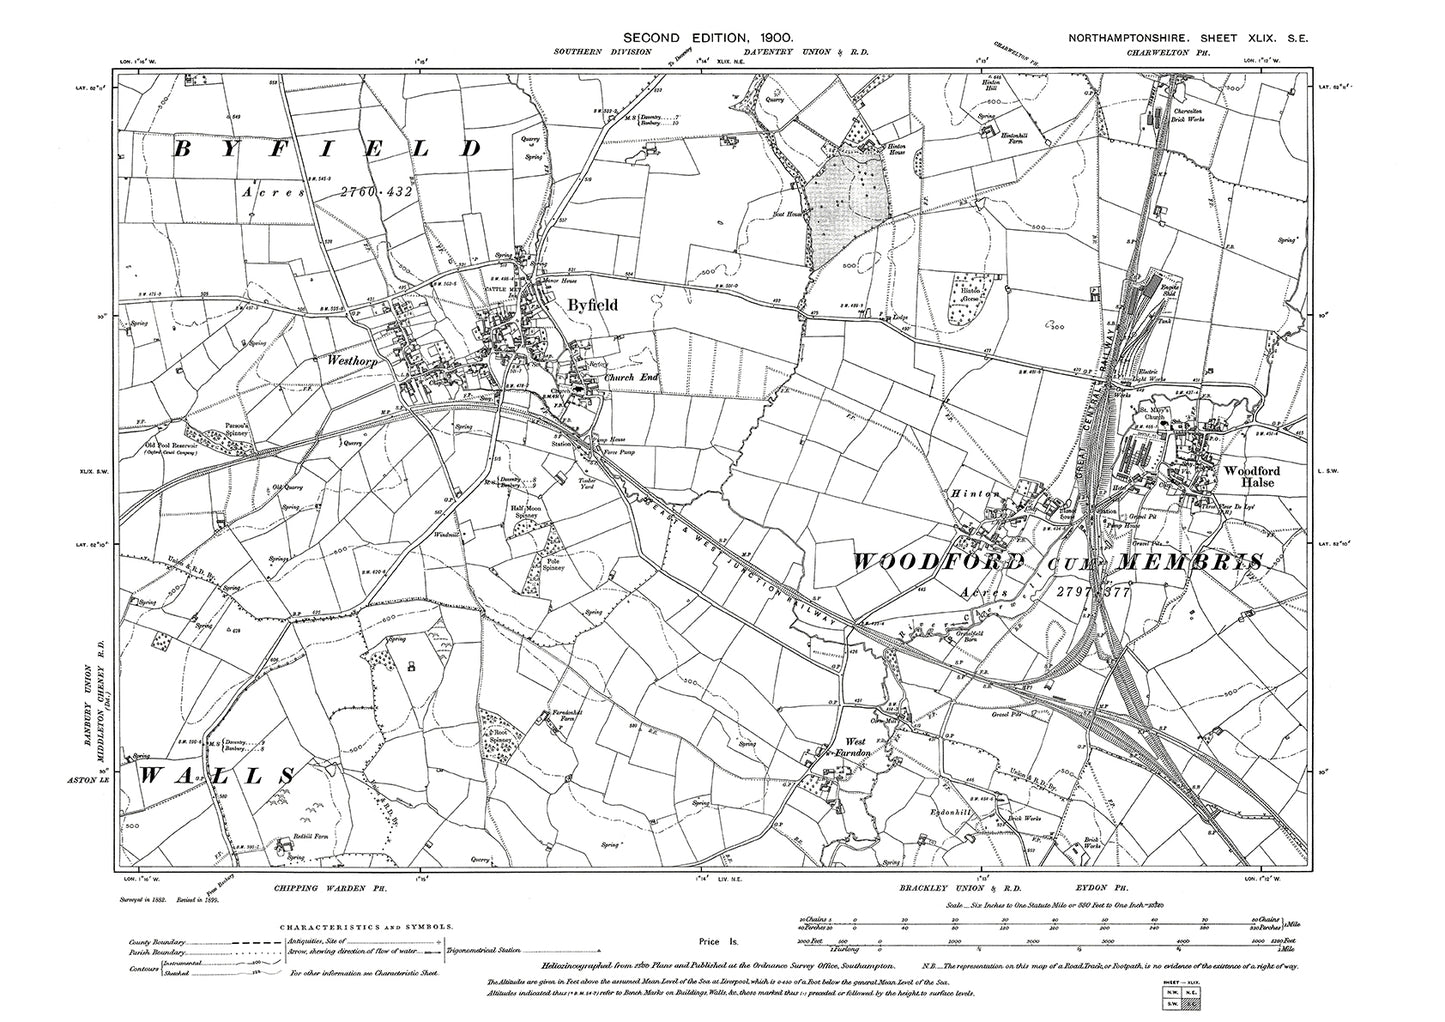 Byfield, Woodford Halse, Northamptonshire in 1900: 49SE